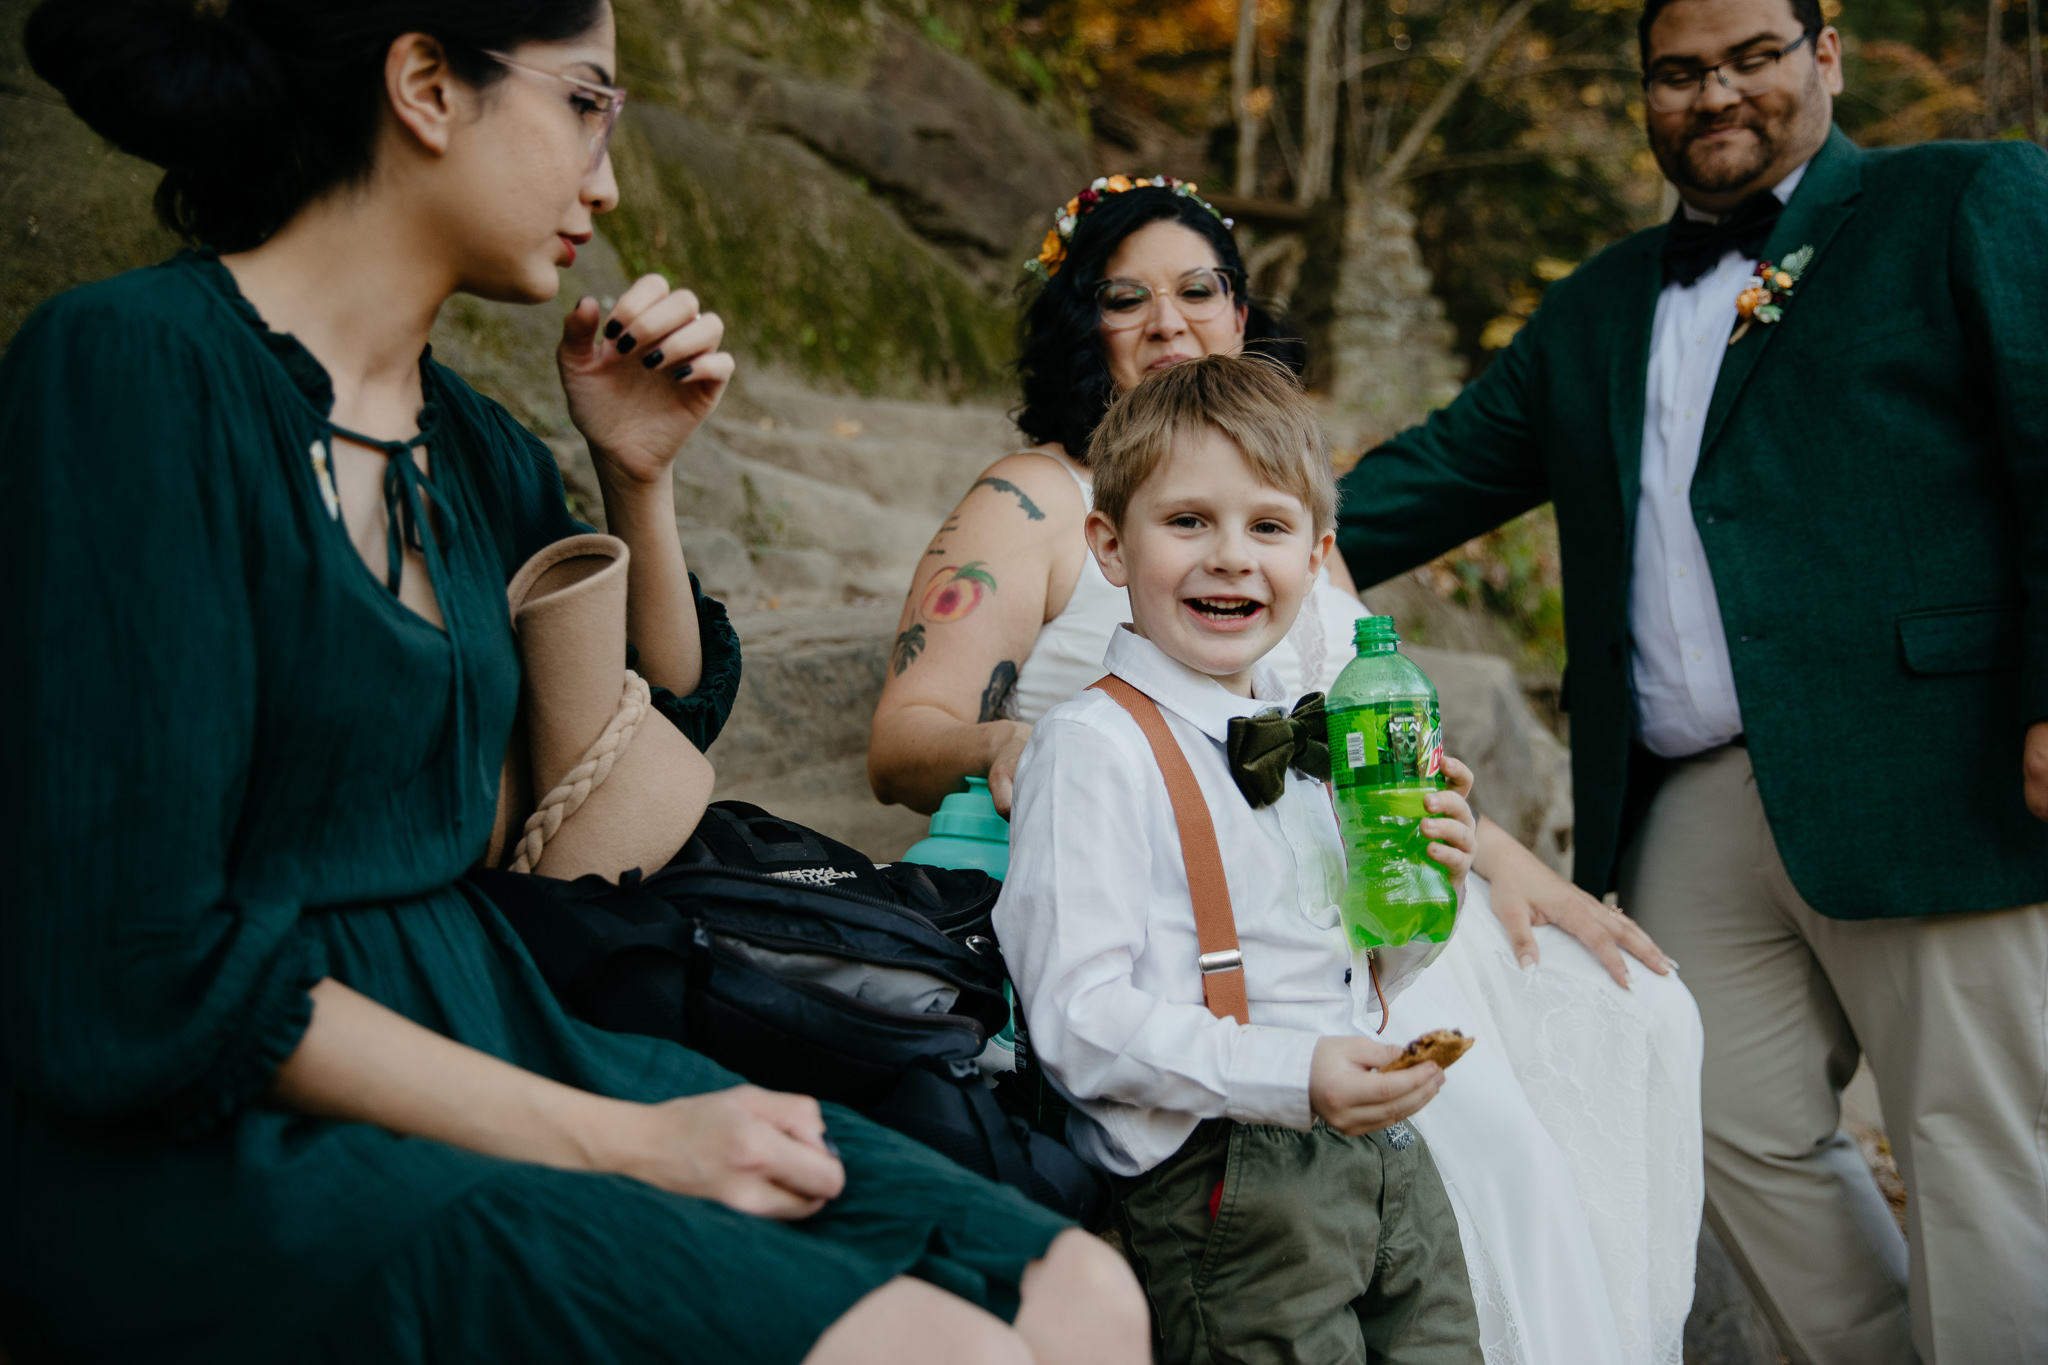 A candid moment of a kid eating snacks and drinking soda during a fall elopement